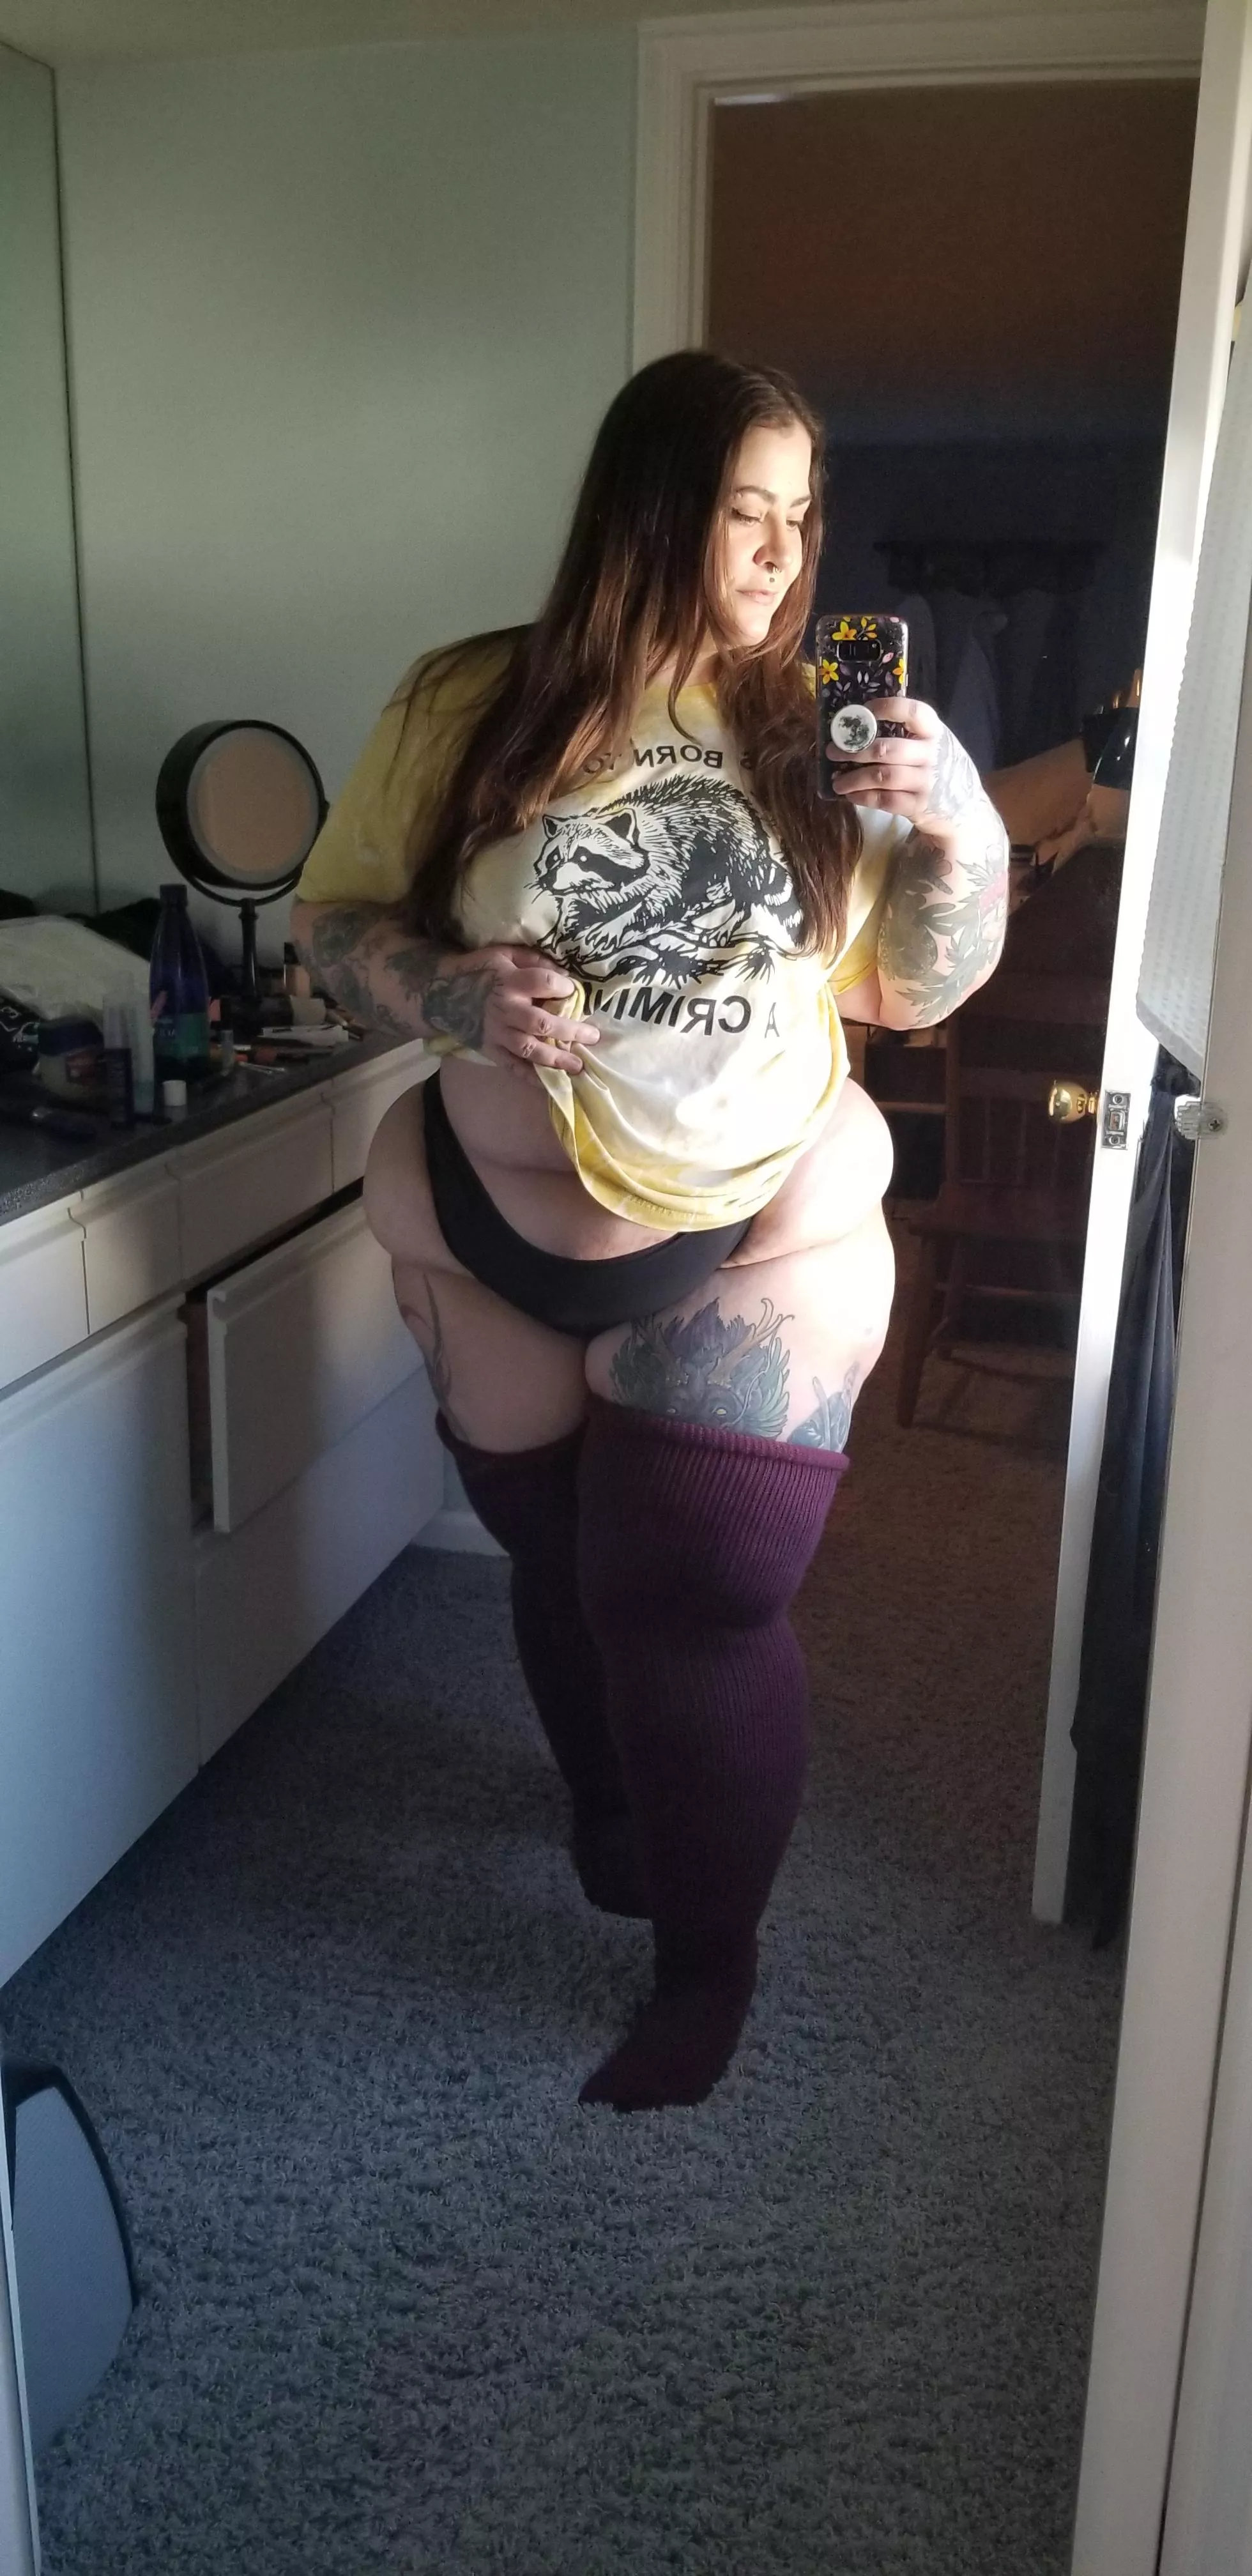 Nude Too Big - Do you think im too big to get on top nudes in ssbbw | Onlynudes.org